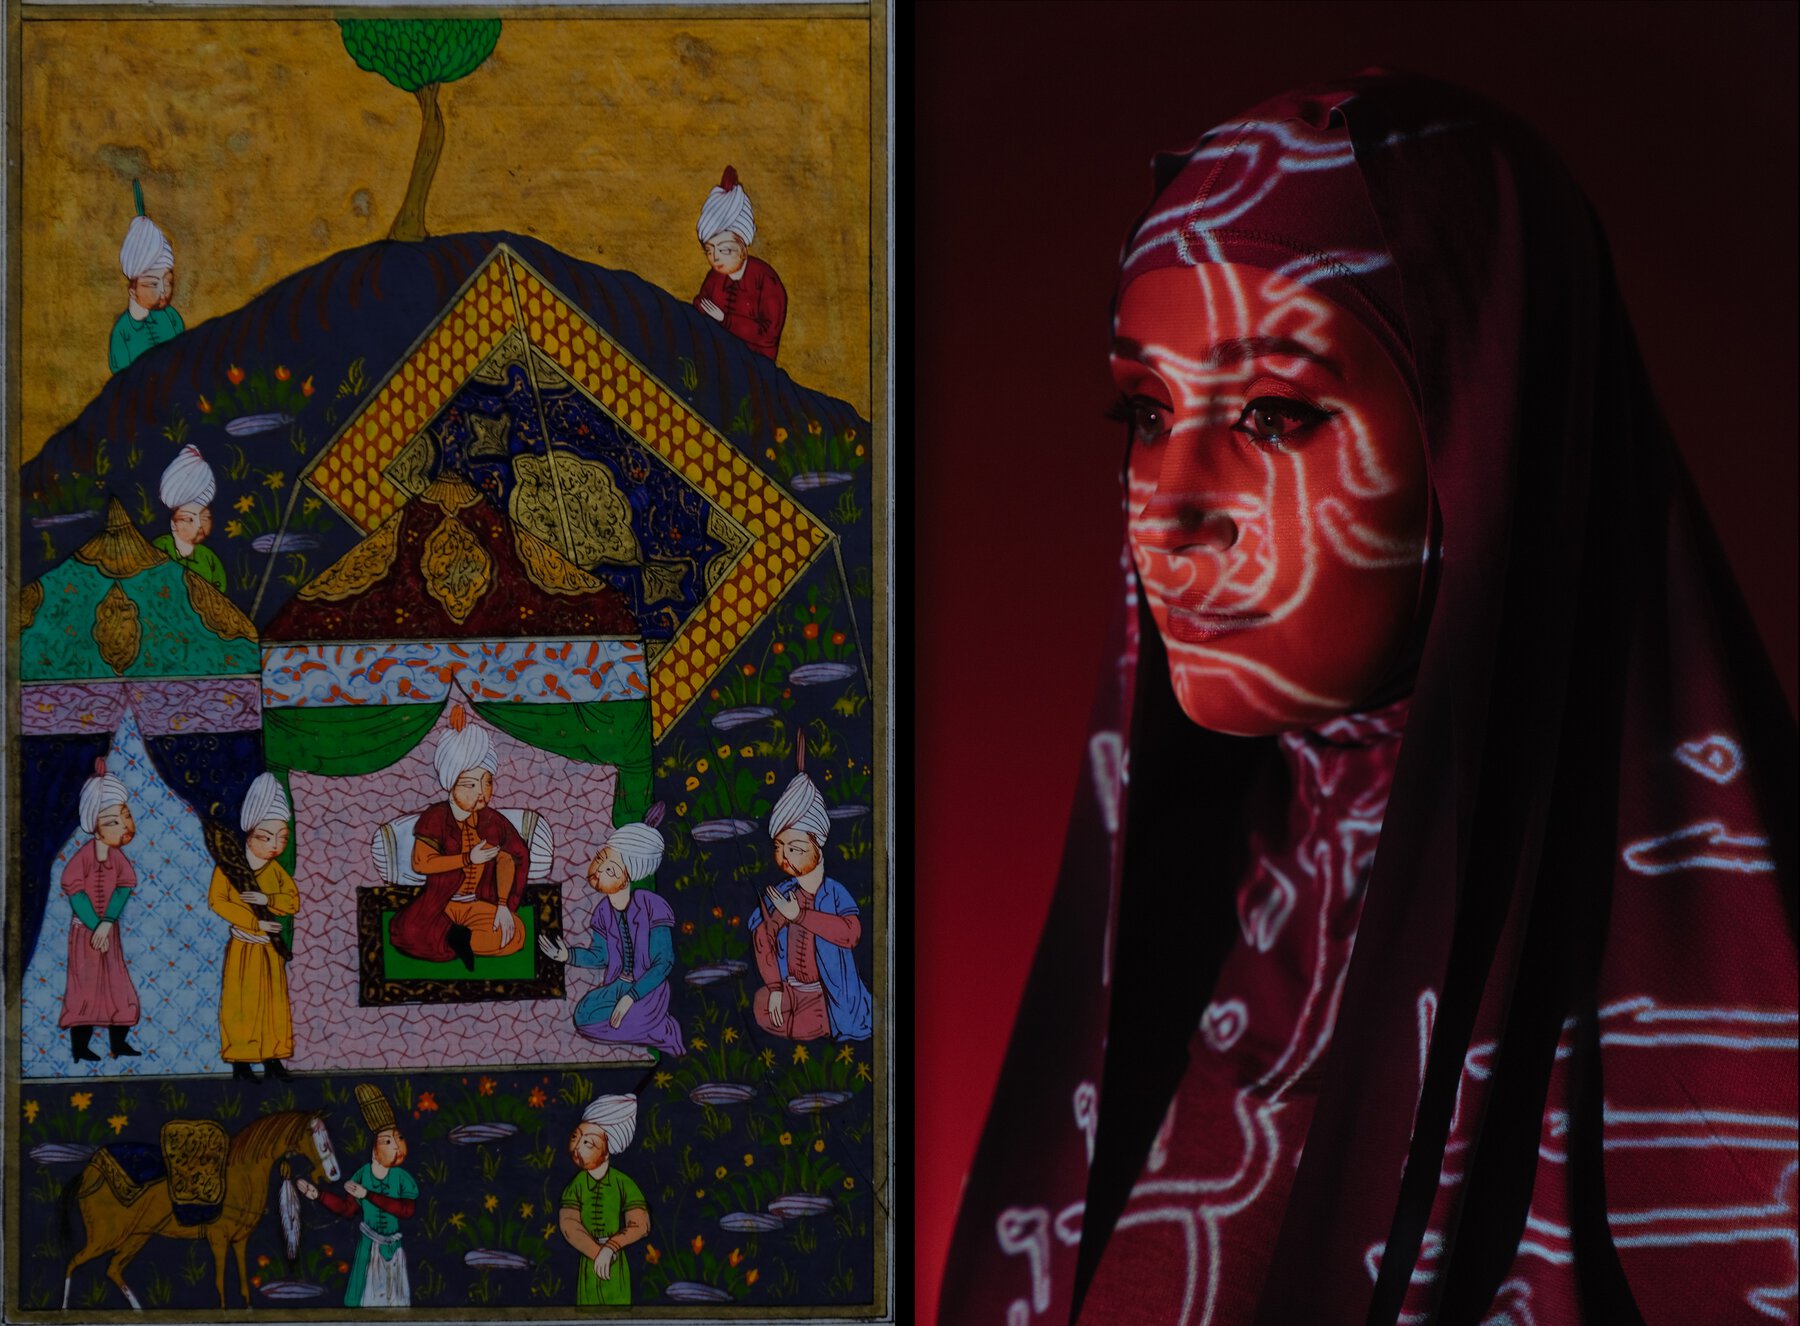 Left: XXX. Right: Woman in Red Hijab and Black Robe